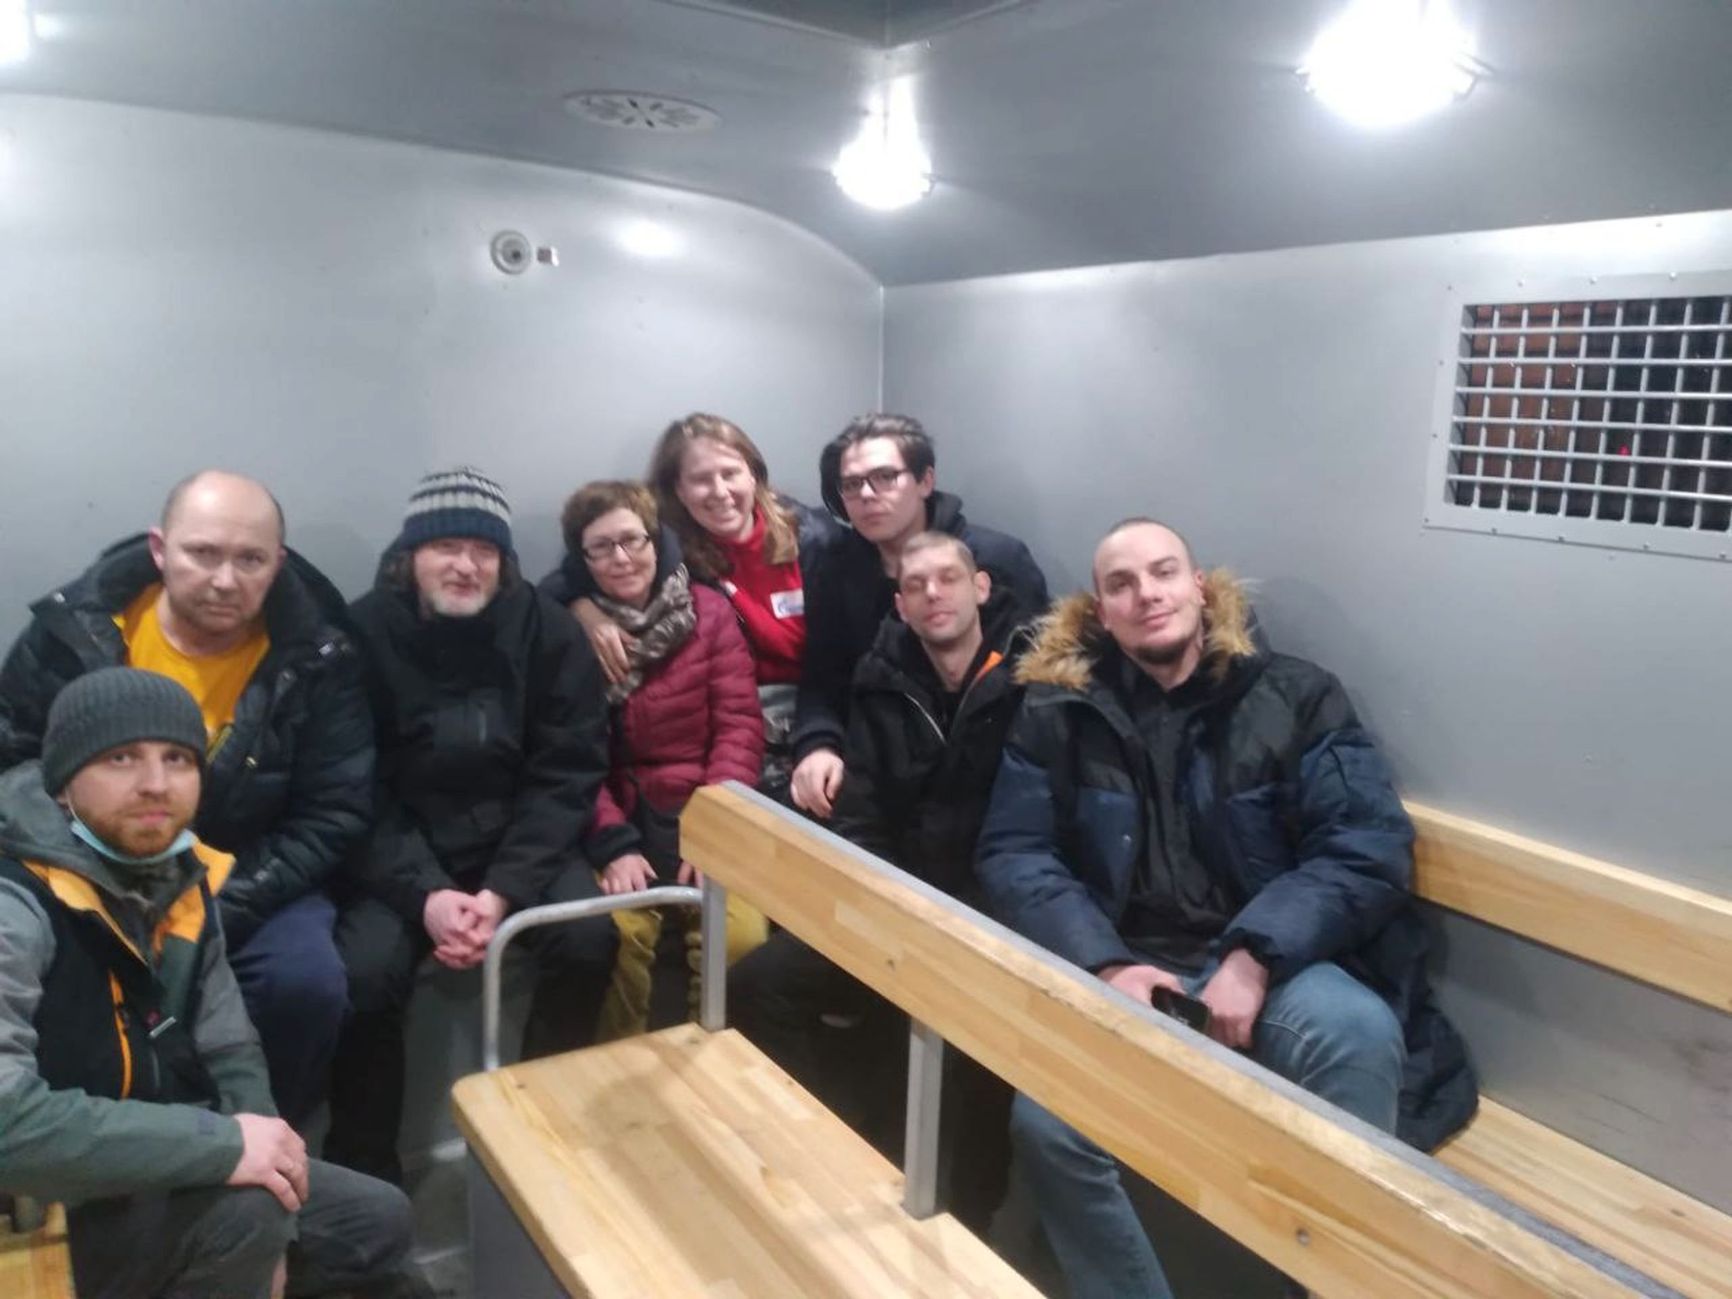 Mark Bennetts (third from left) in a police van in Moscow, February 28, 2022